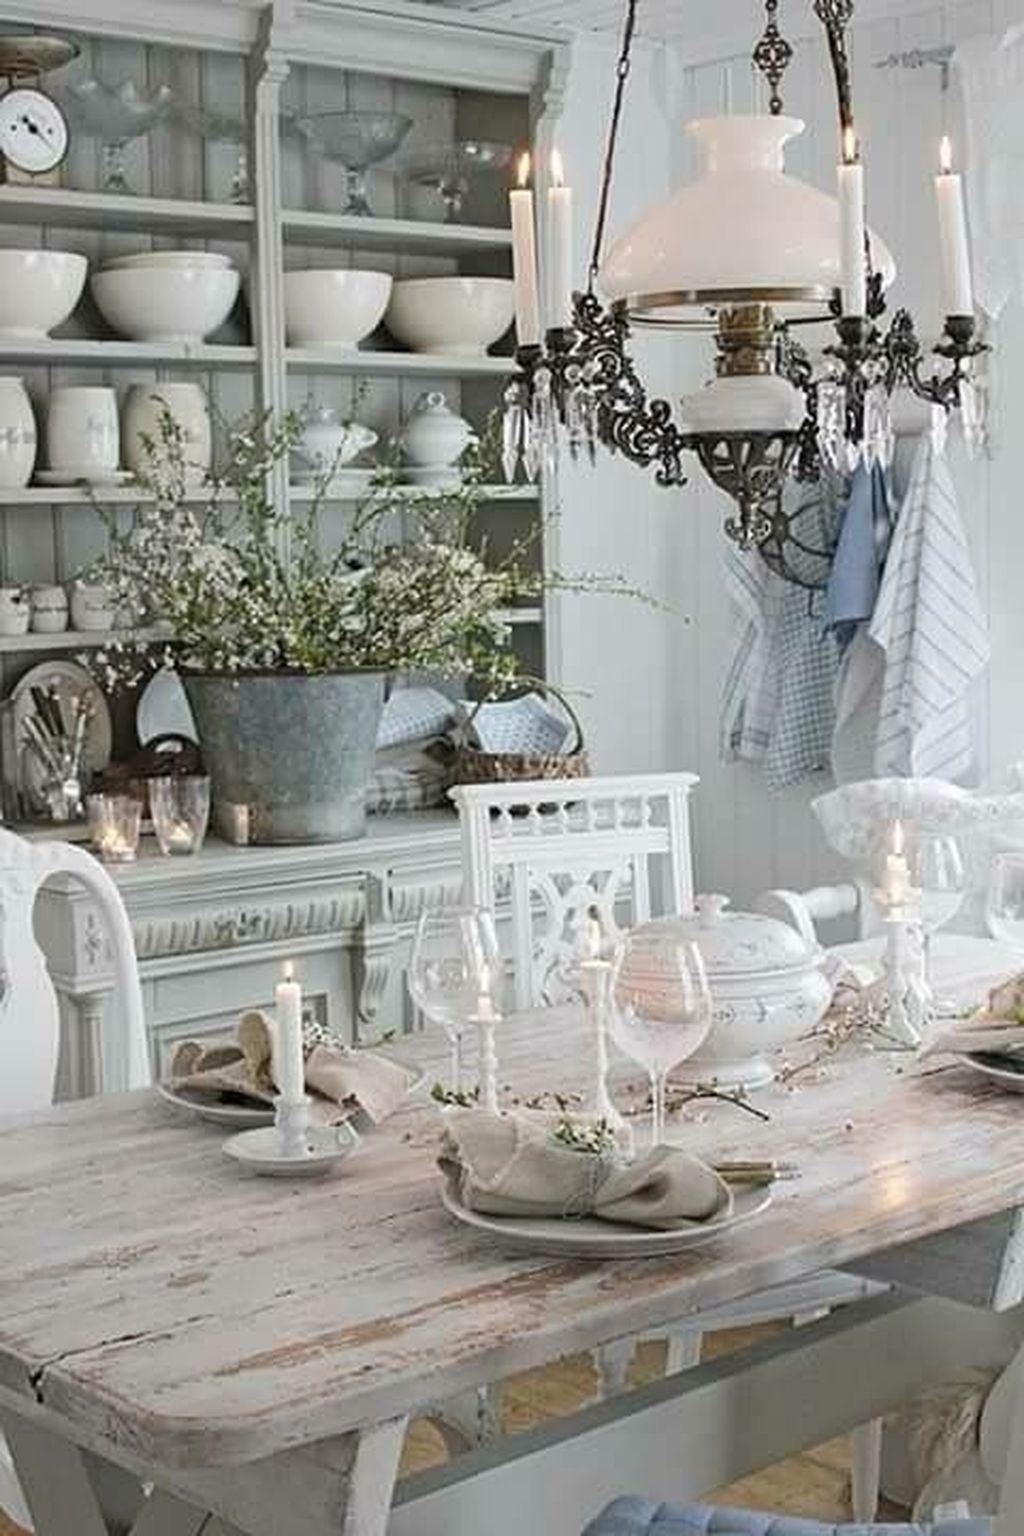 The Best French Country Style Kitchen Decor Ideas 44   PIMPHOMEE